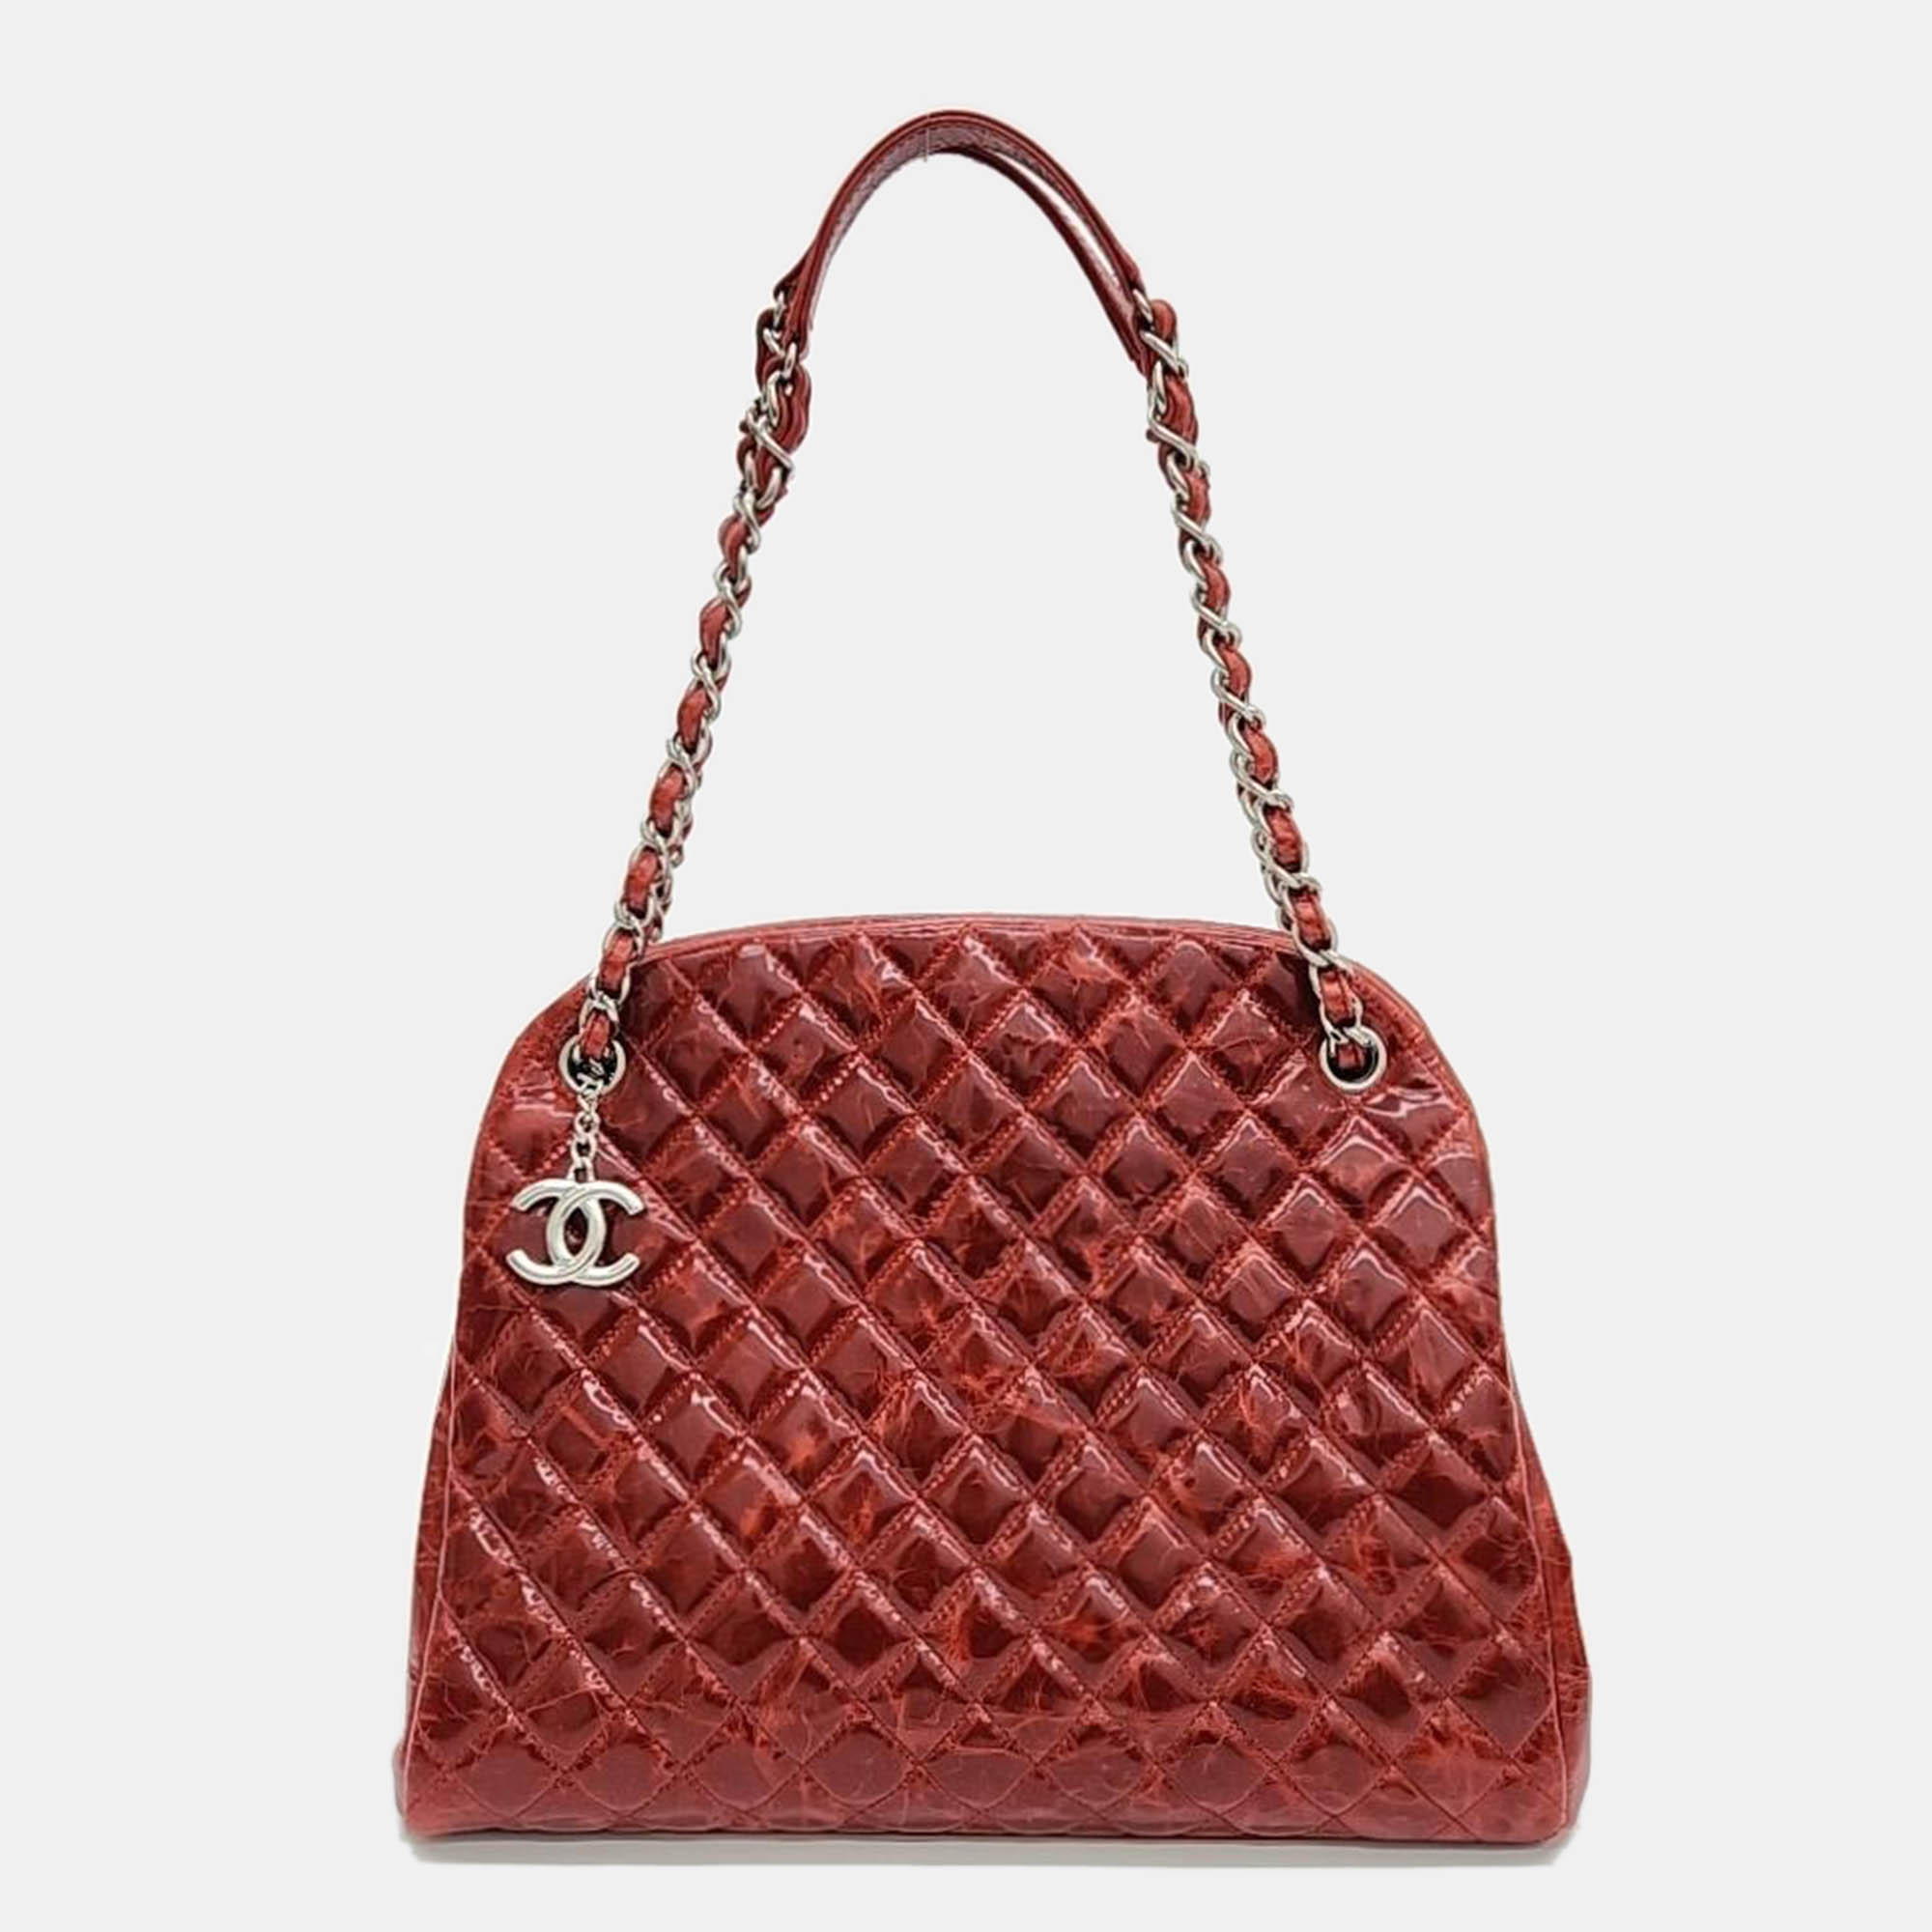 Chanel Red Leather Mademoiselle Bowling Bag